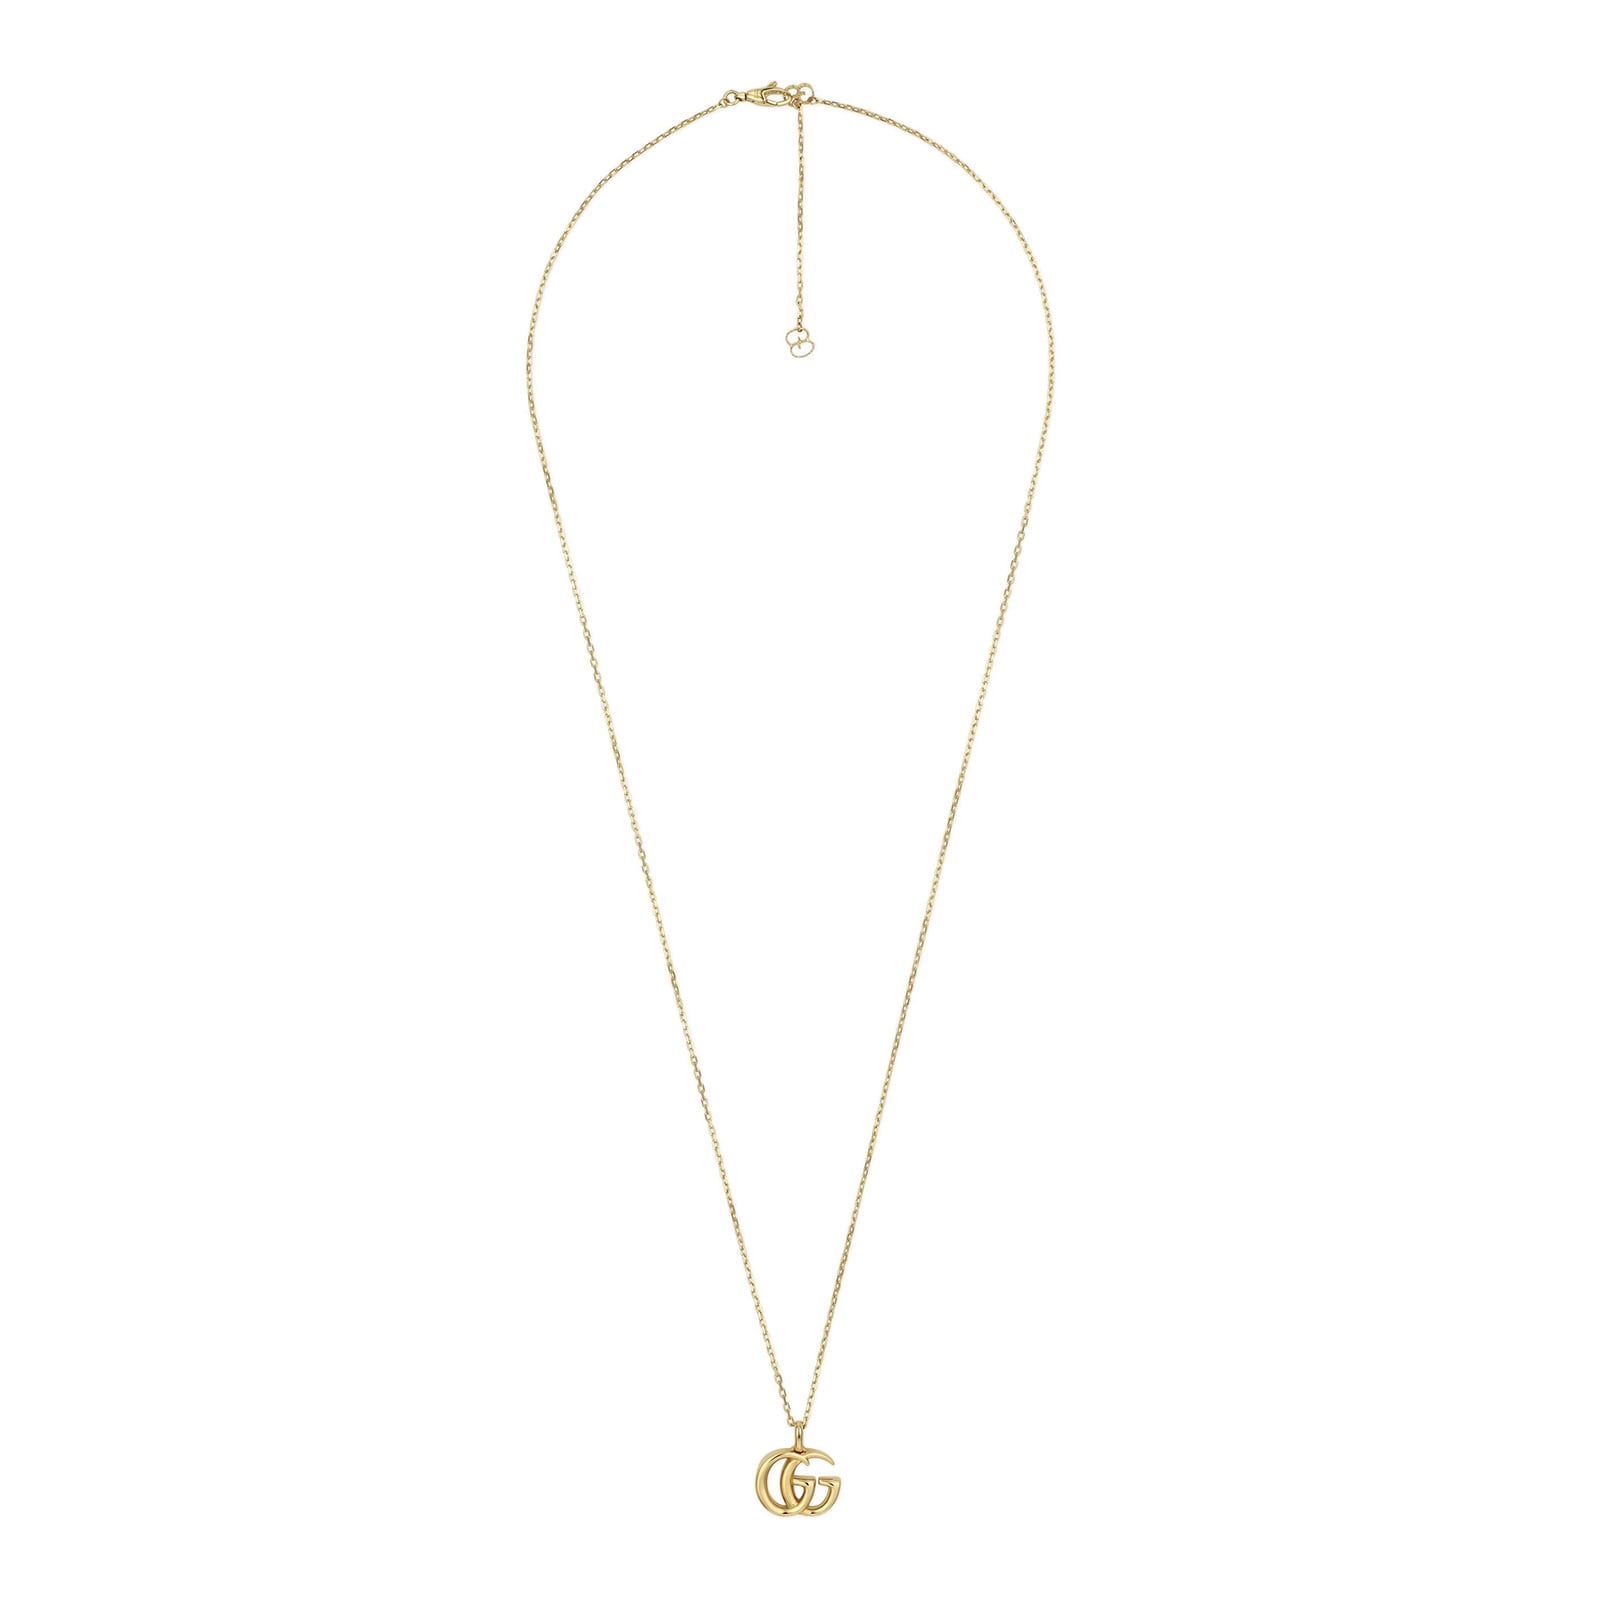 Gucci - Snake Necklace With Crystals | Lyst